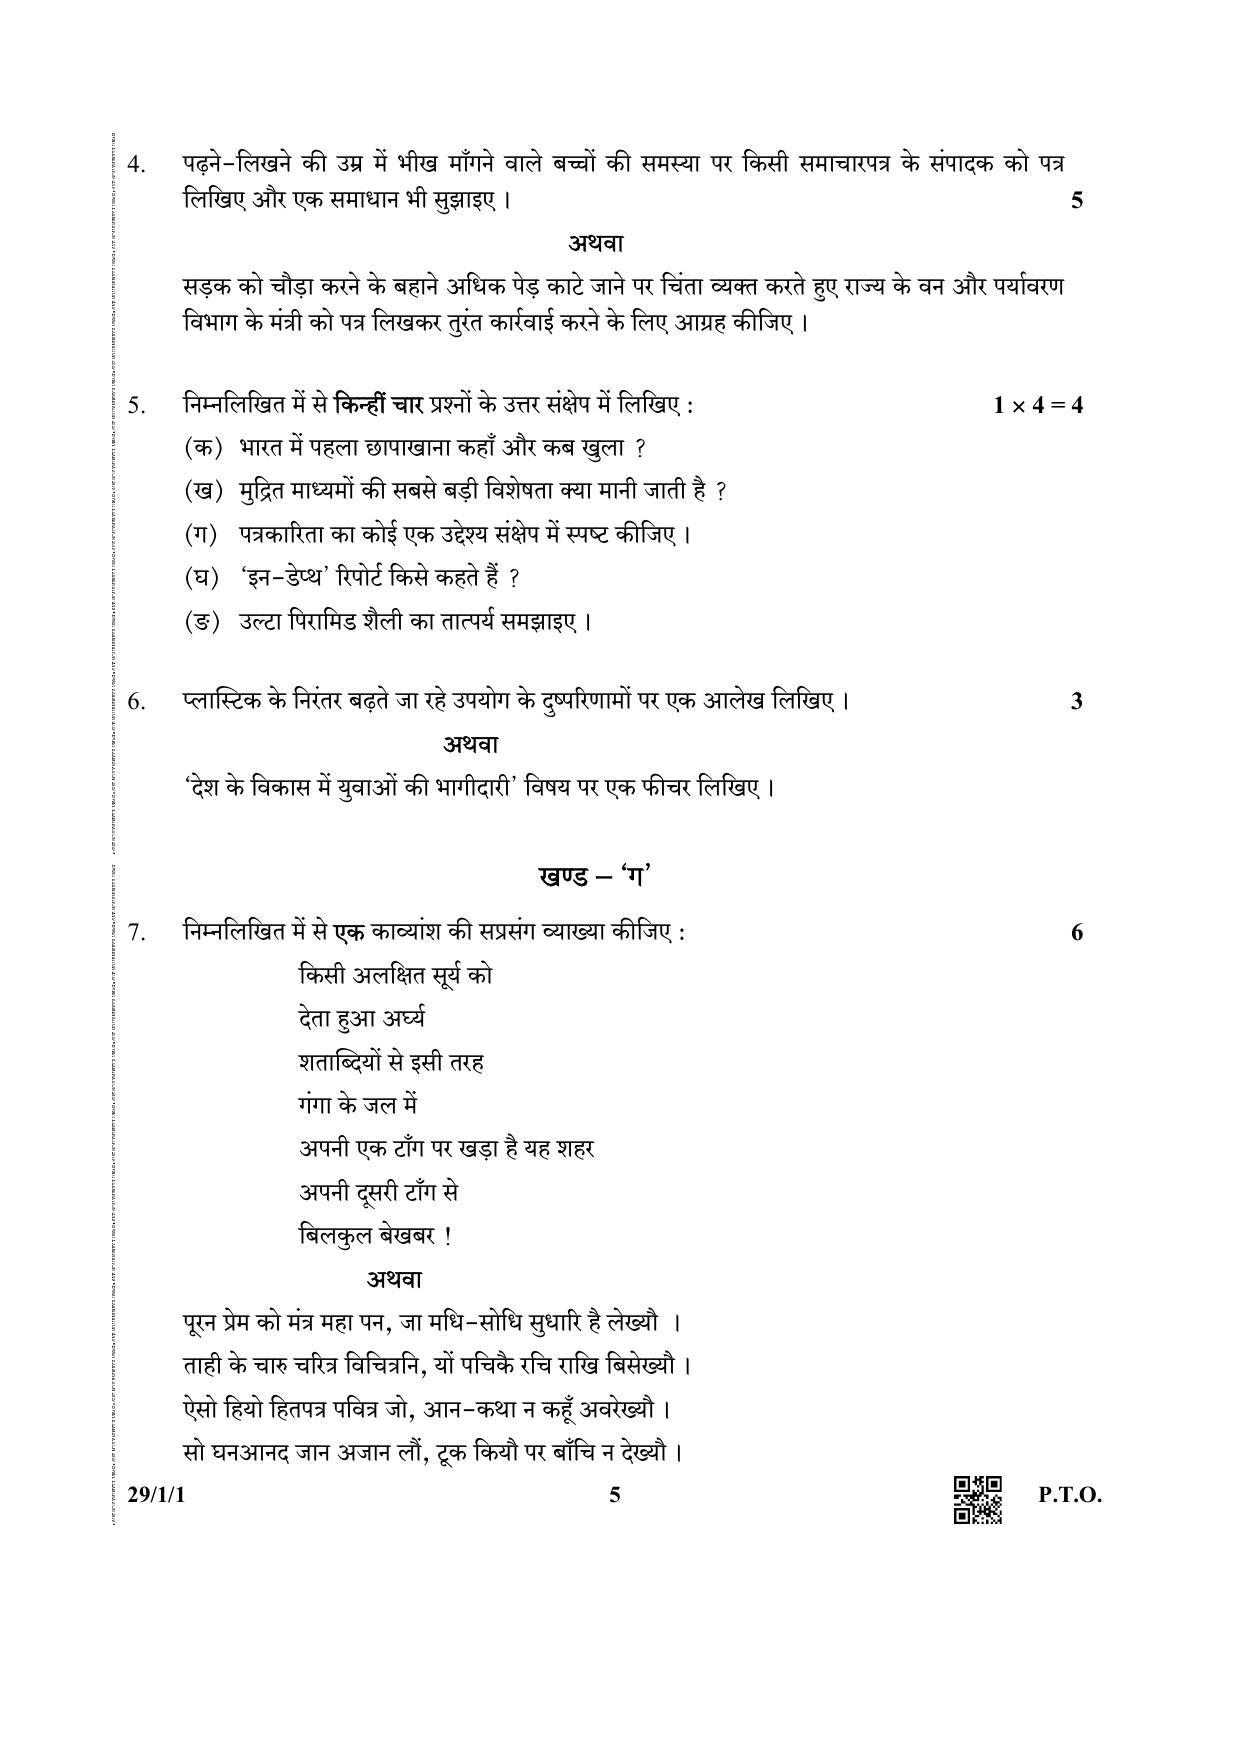 CBSE Class 12 29-1-1 (Hindi ELECTIVE) 2019 Question Paper - Page 5